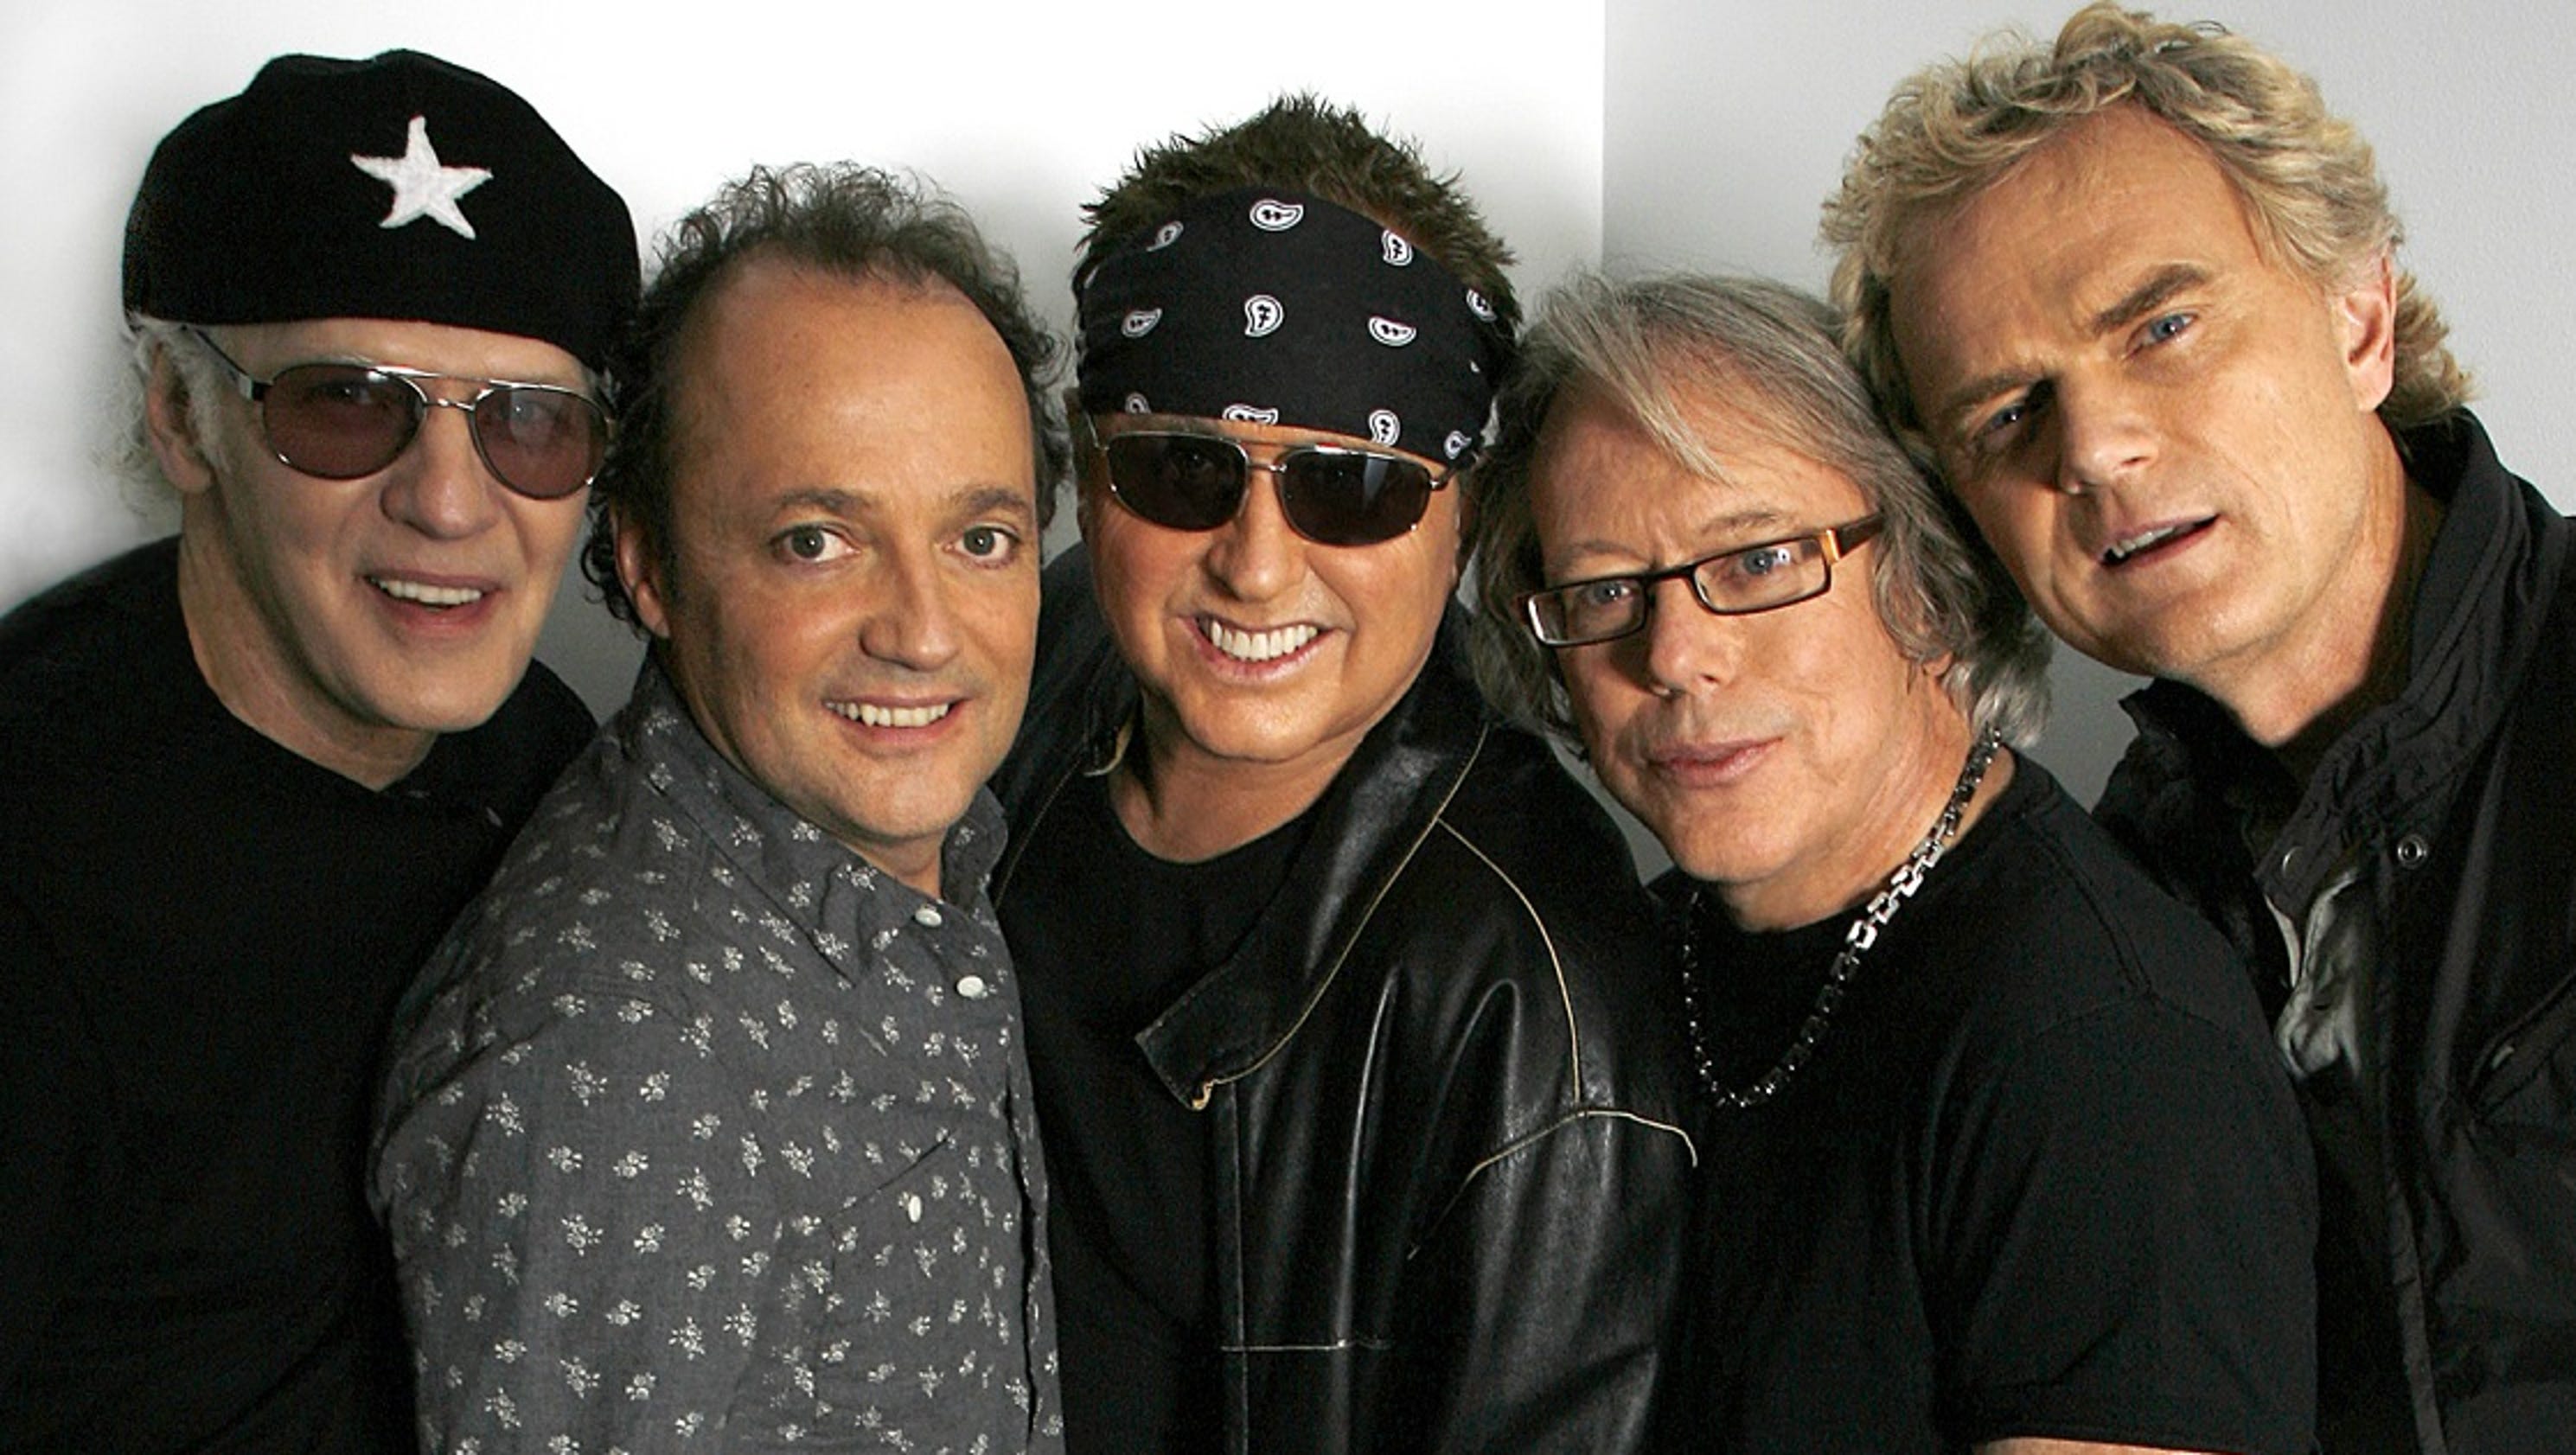 Record crowd expected for free Loverboy Fishers concert Friday